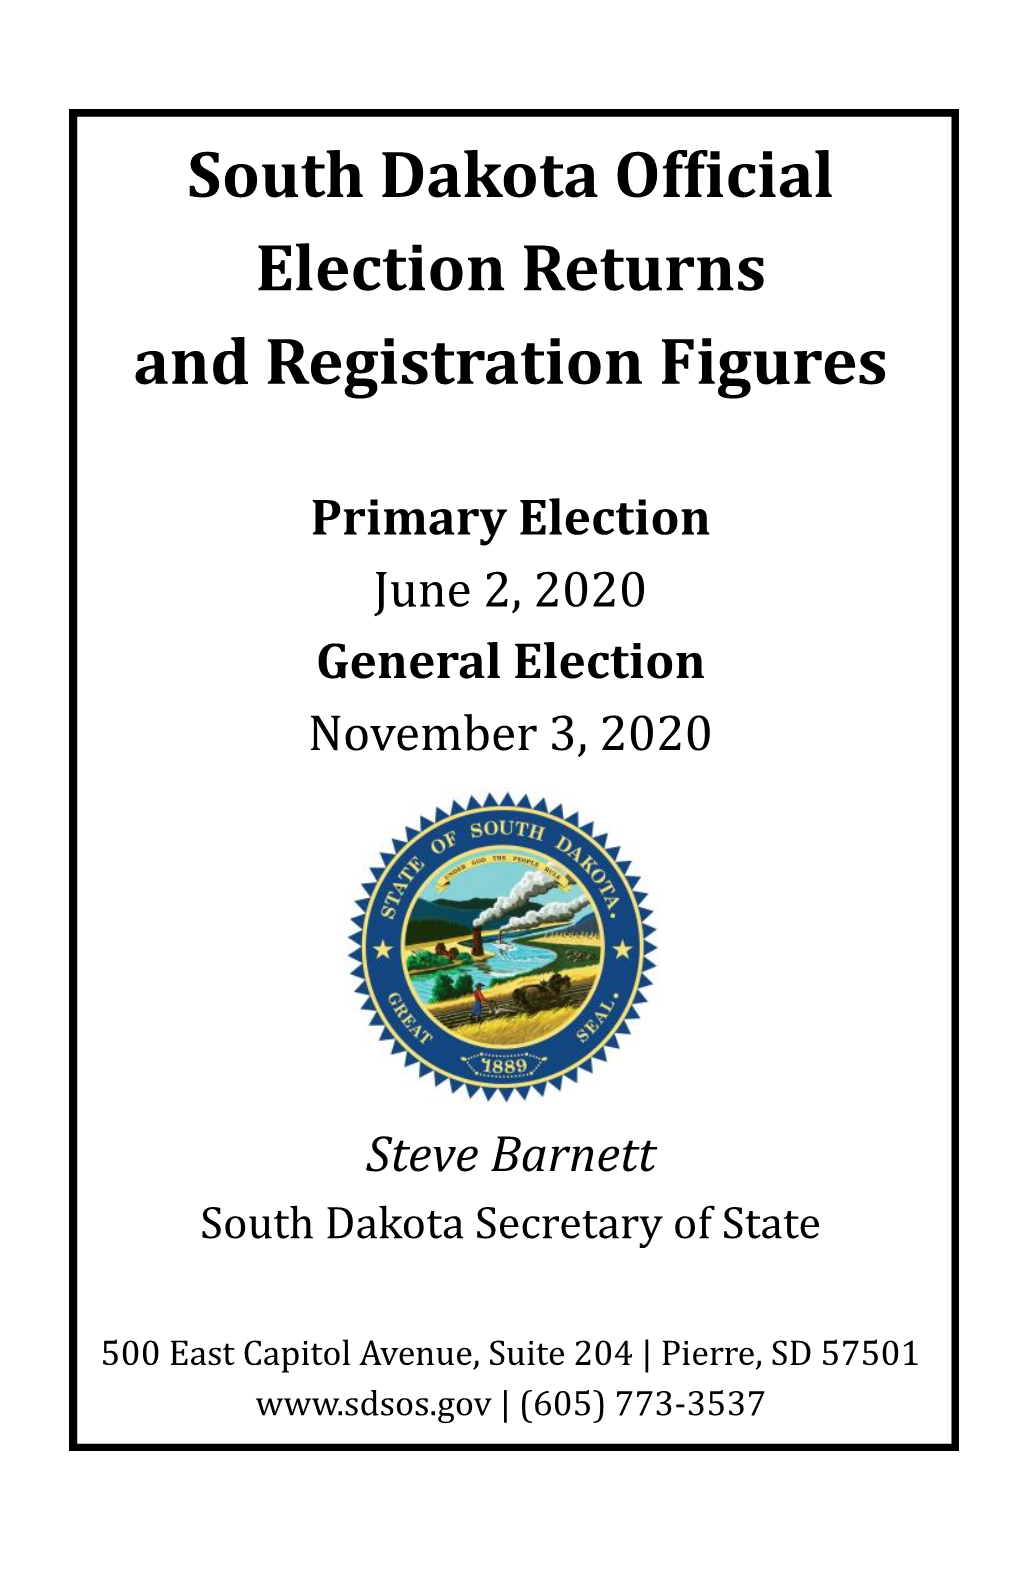 2020 General and Primary Election